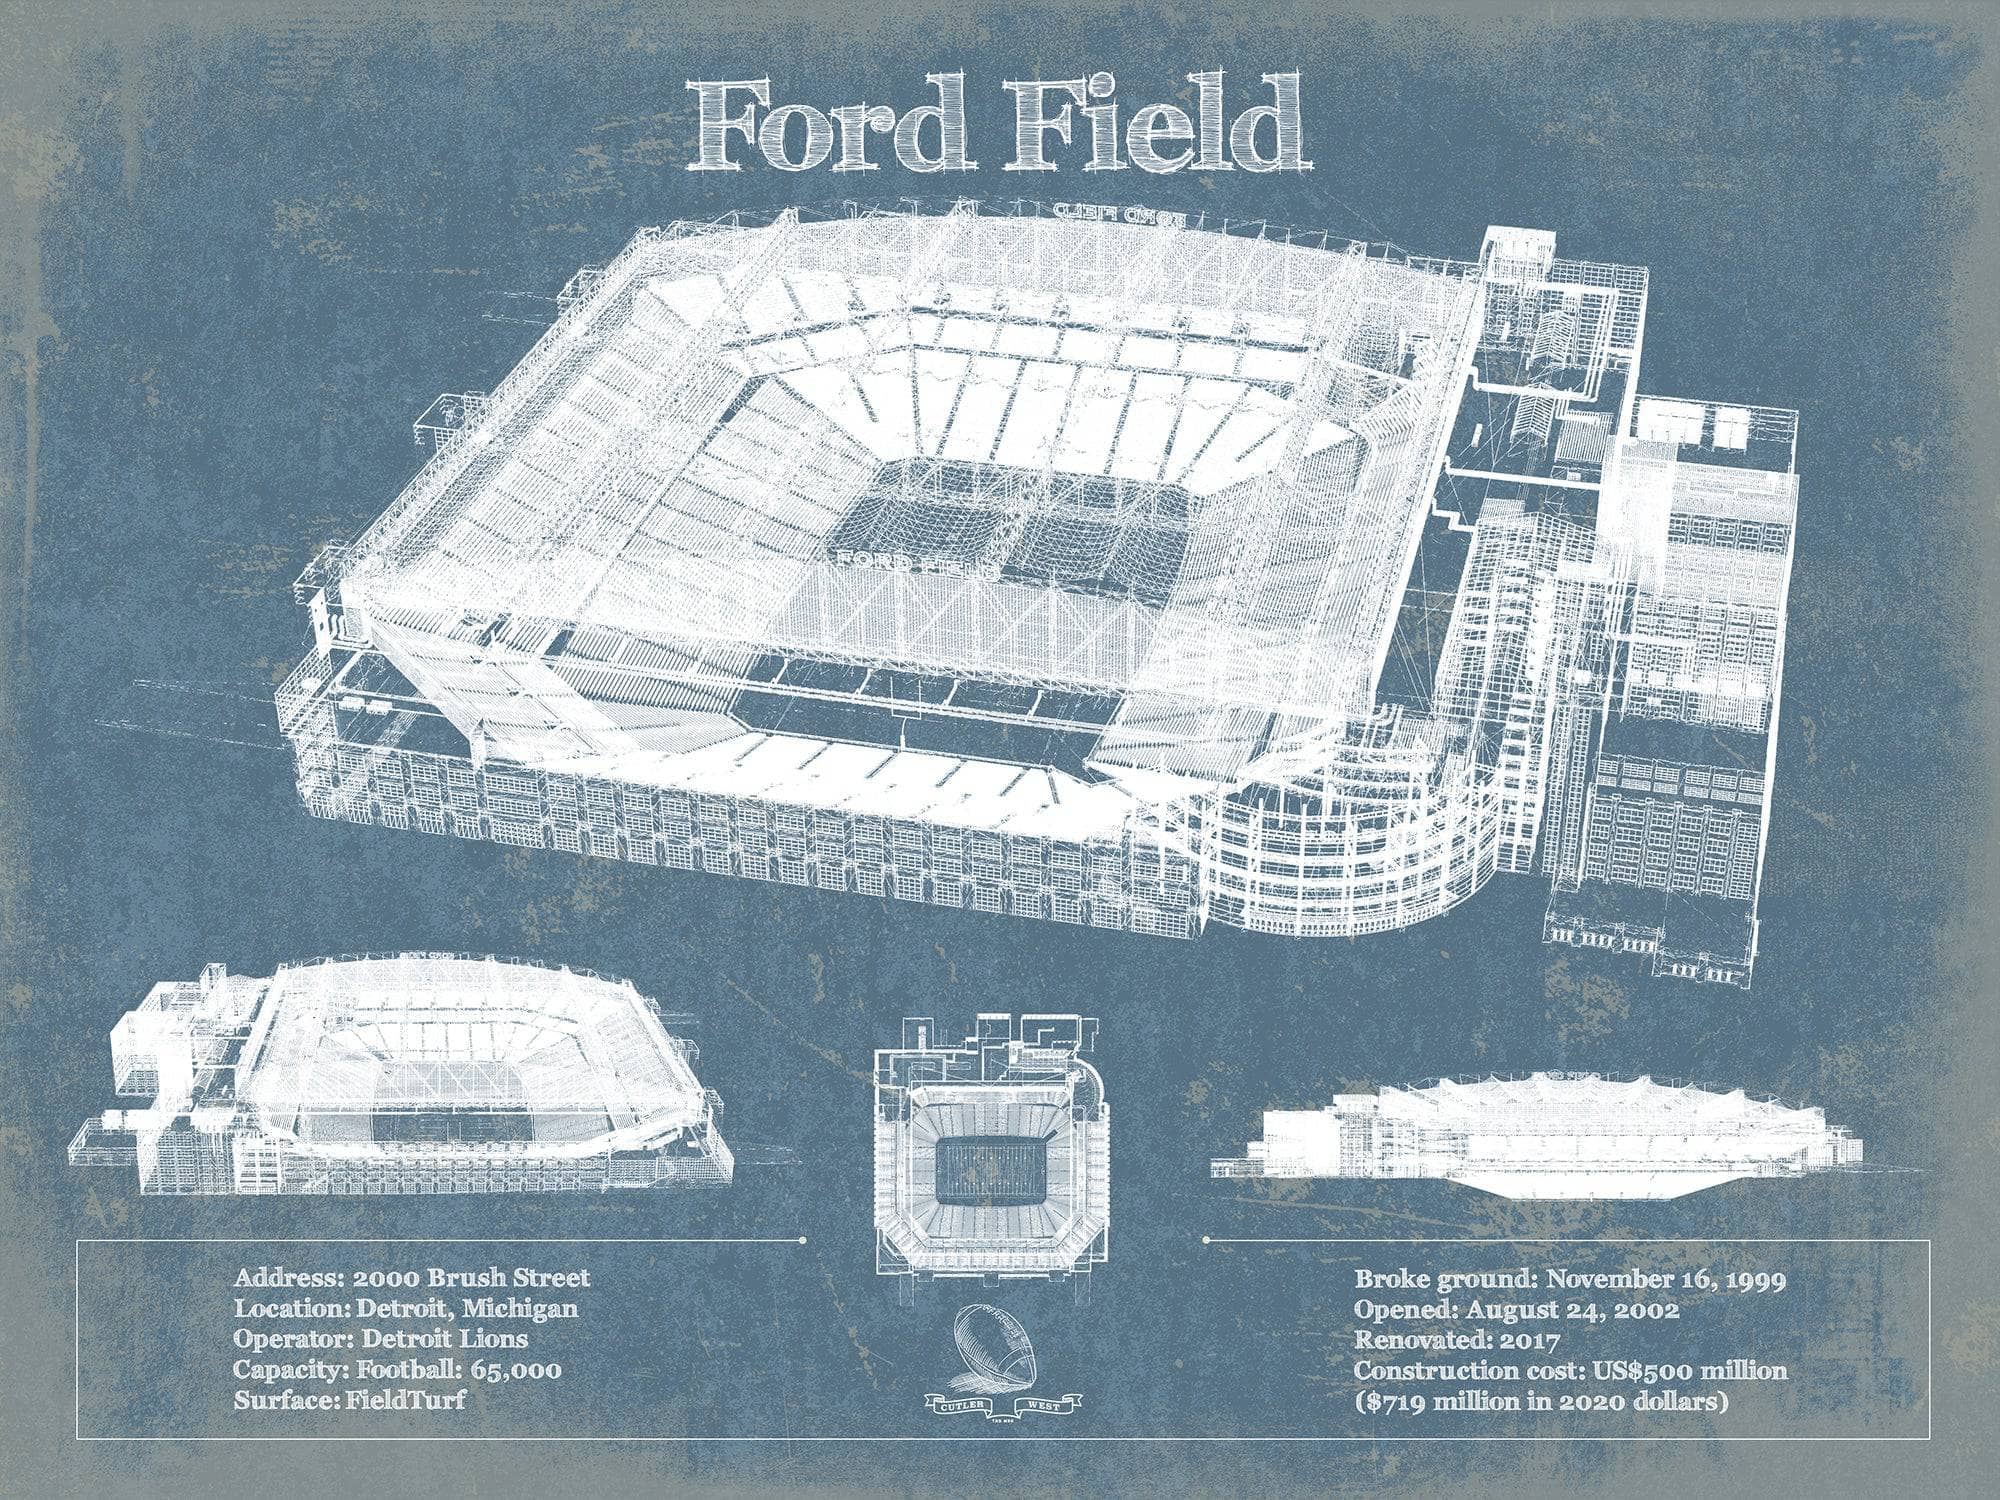 Cutler West Vehicle Collection 14" x 11" / Unframed Ford Field - Detroit Lions NFL Vintage Football Print 933311125_54875